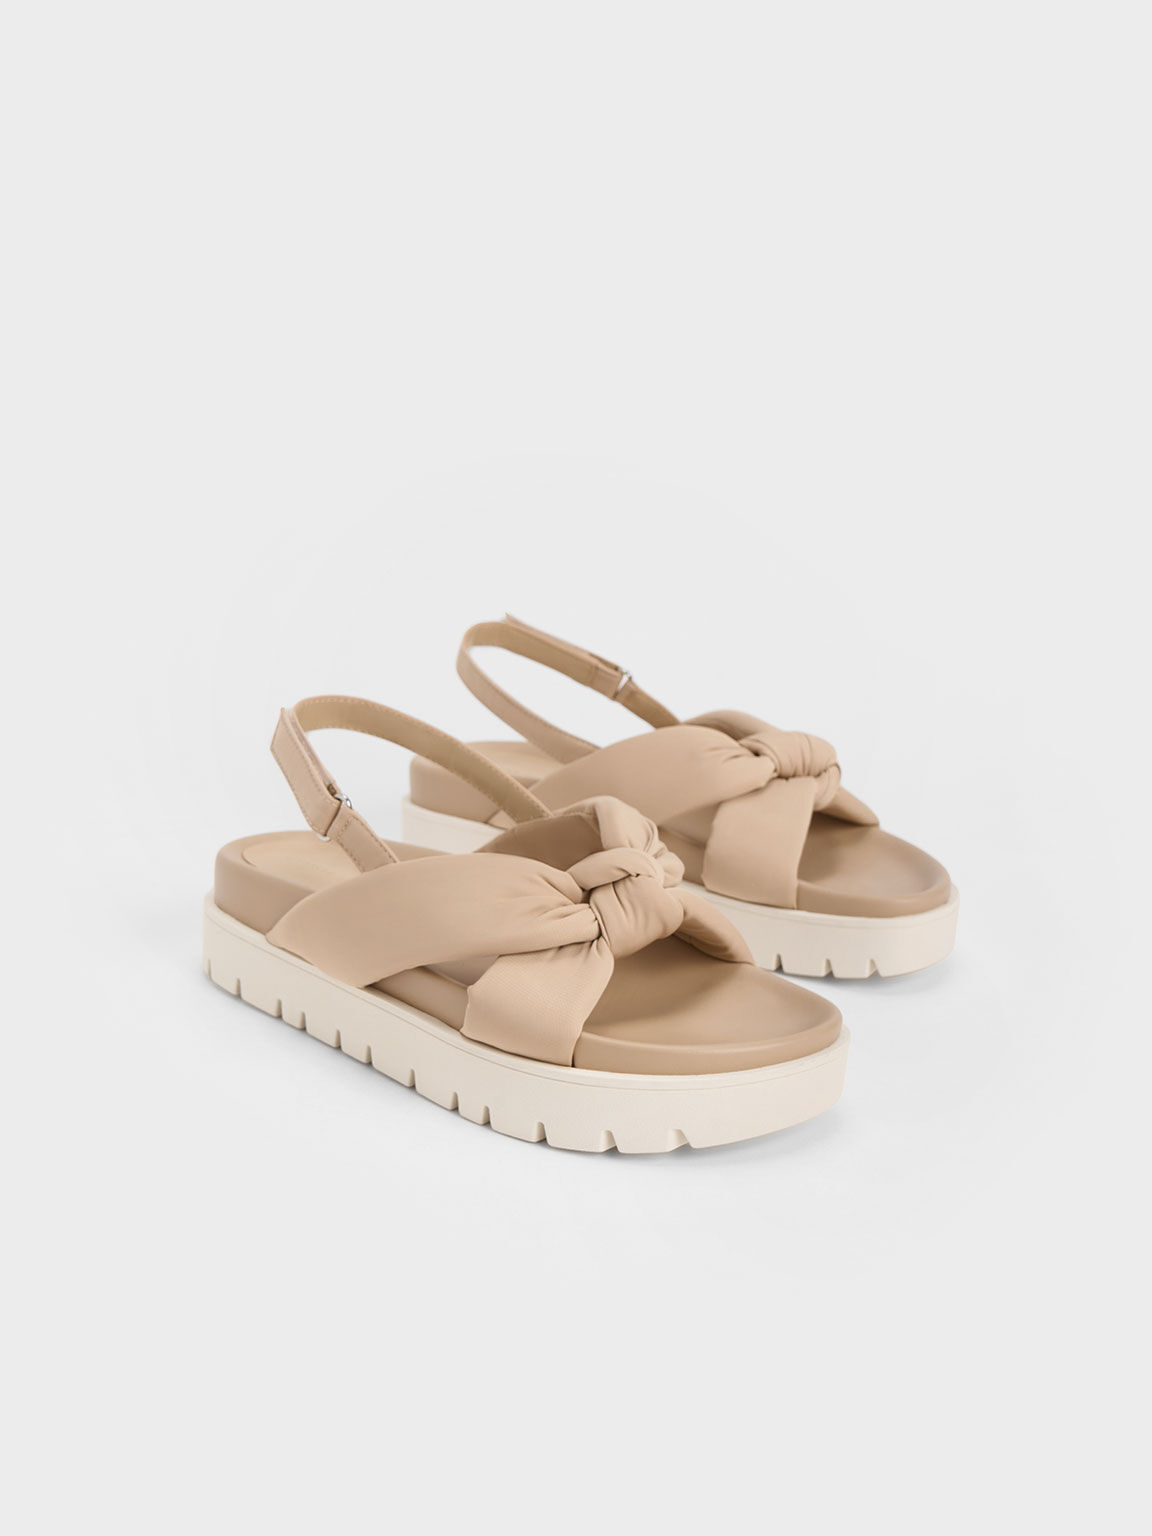 Nude Nylon Knotted Flatform Sandals - CHARLES & KEITH NZ